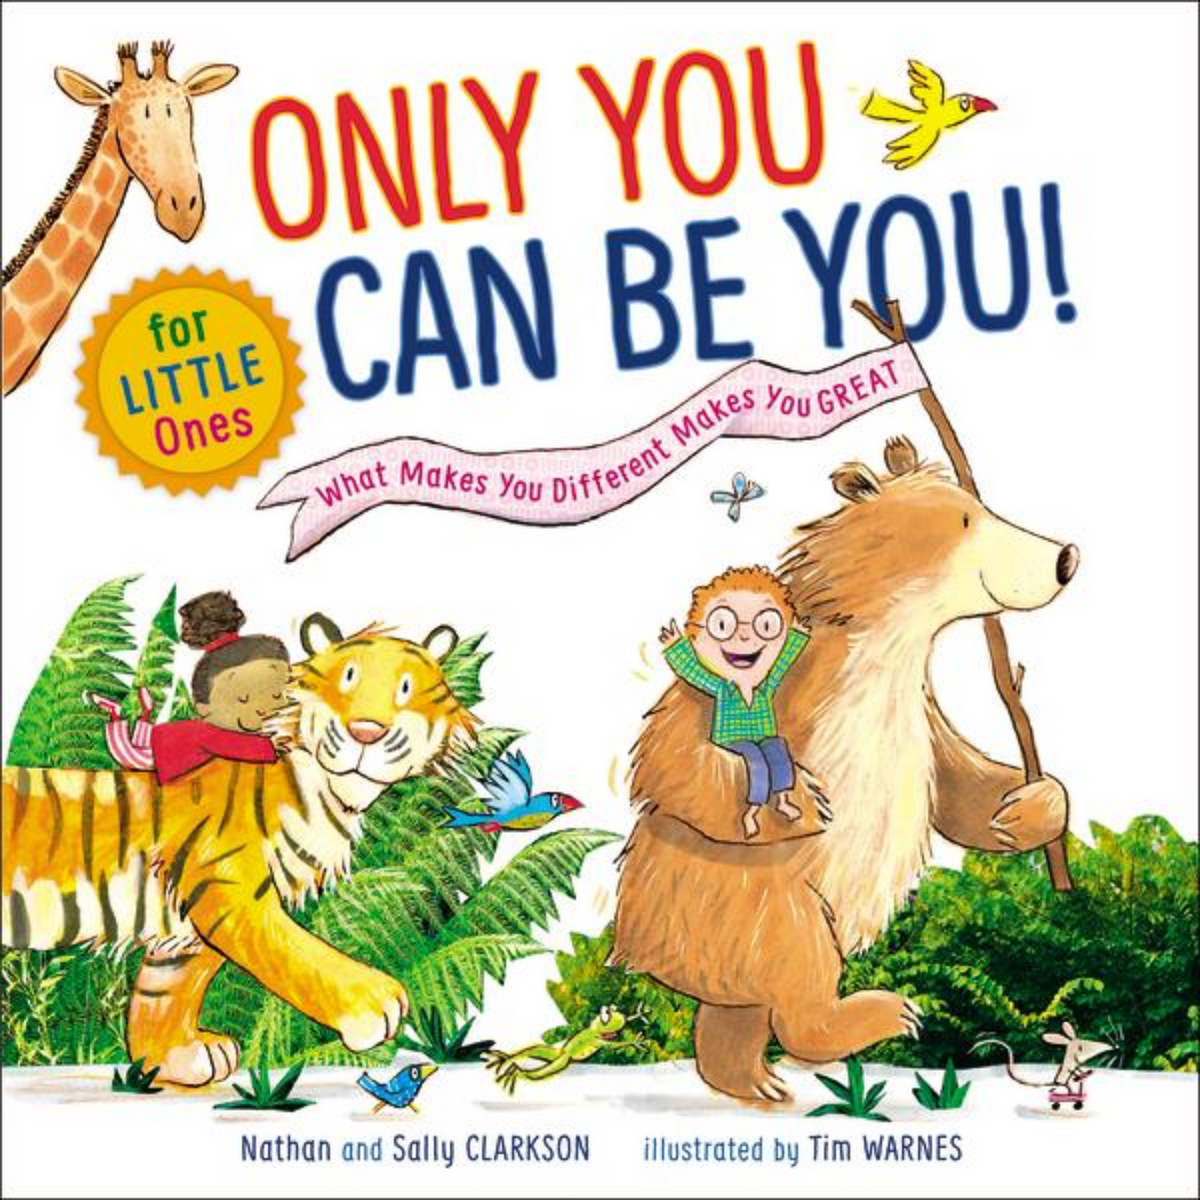 Can　Bookstore　–　Faithworks　Be　You　Little　One　Only　You